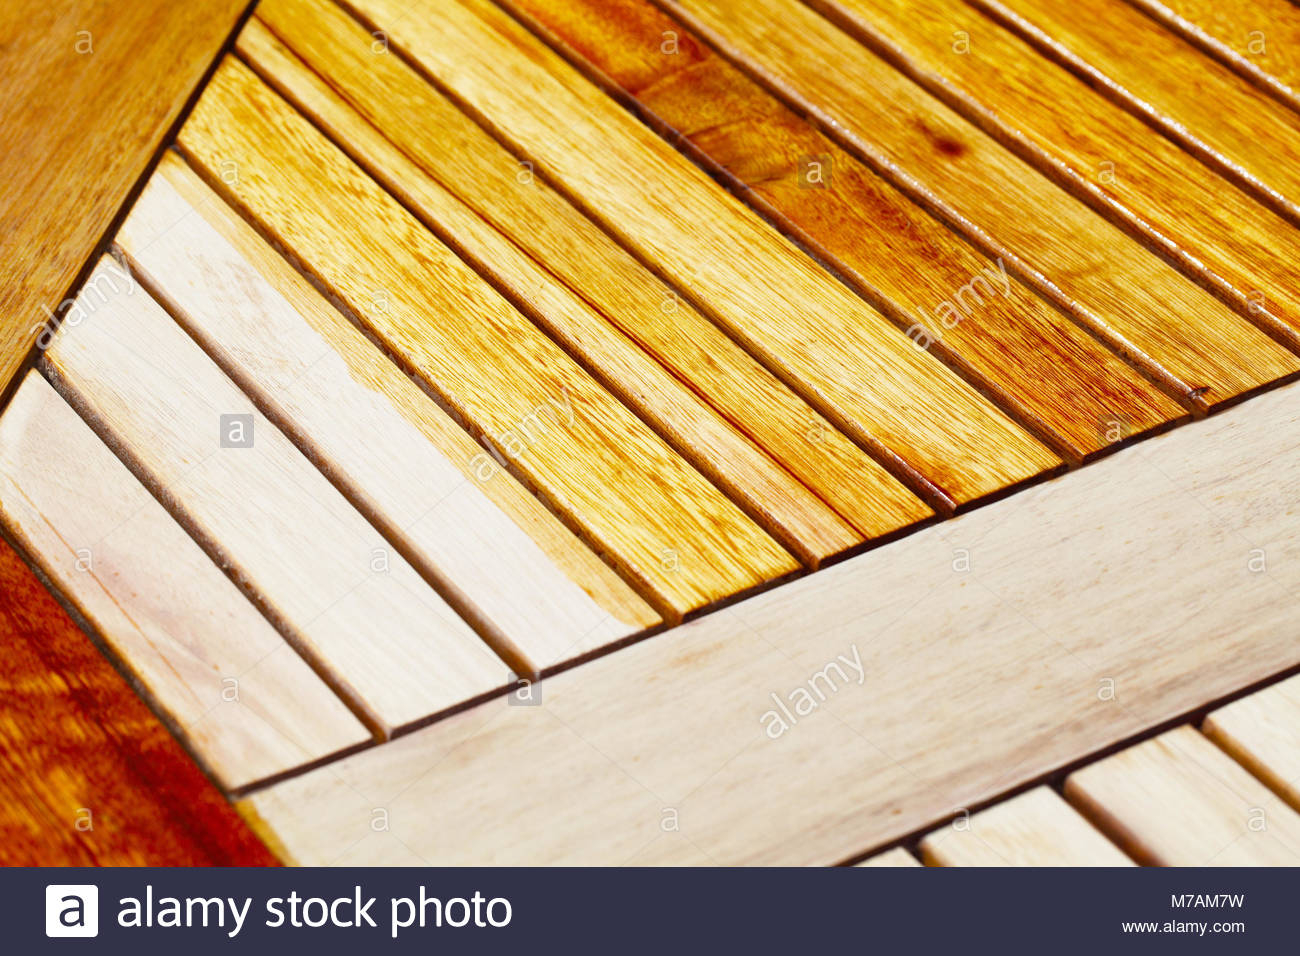 Applying Oil To Wooden Patio Furniture Stock Photo inside dimensions 1300 X 956